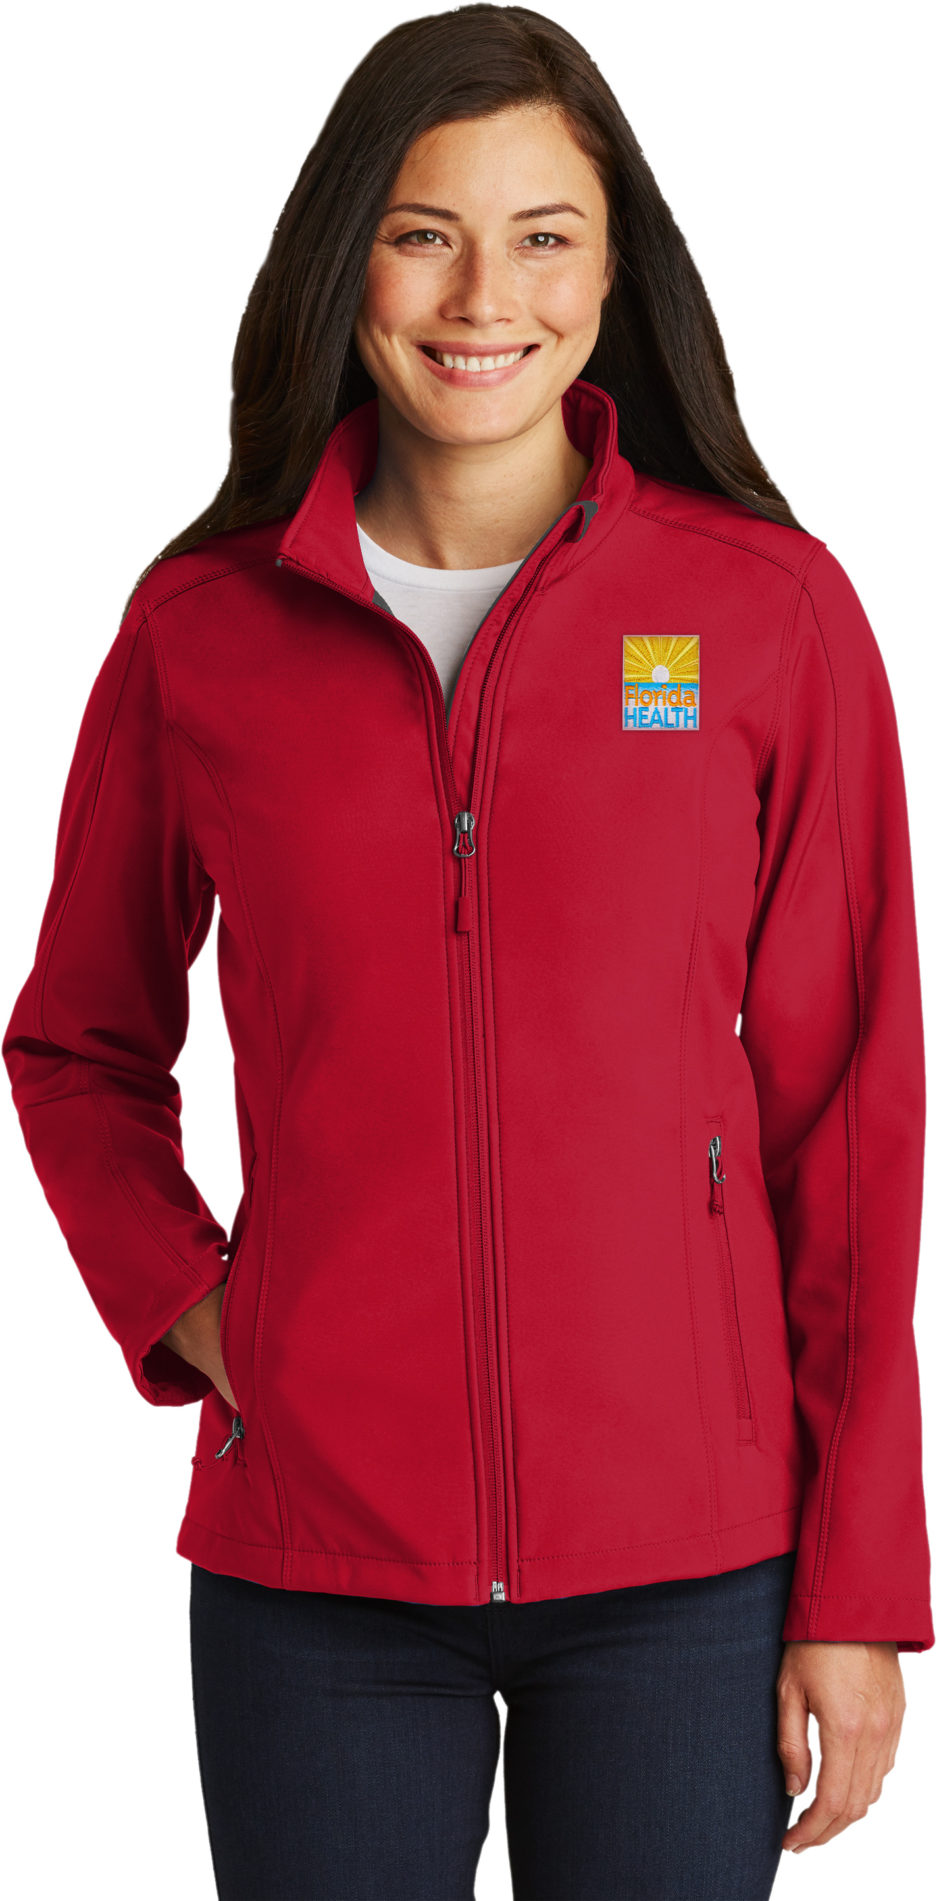 Female Model Wearing Bright Red Full Zip Jacket with Pockets